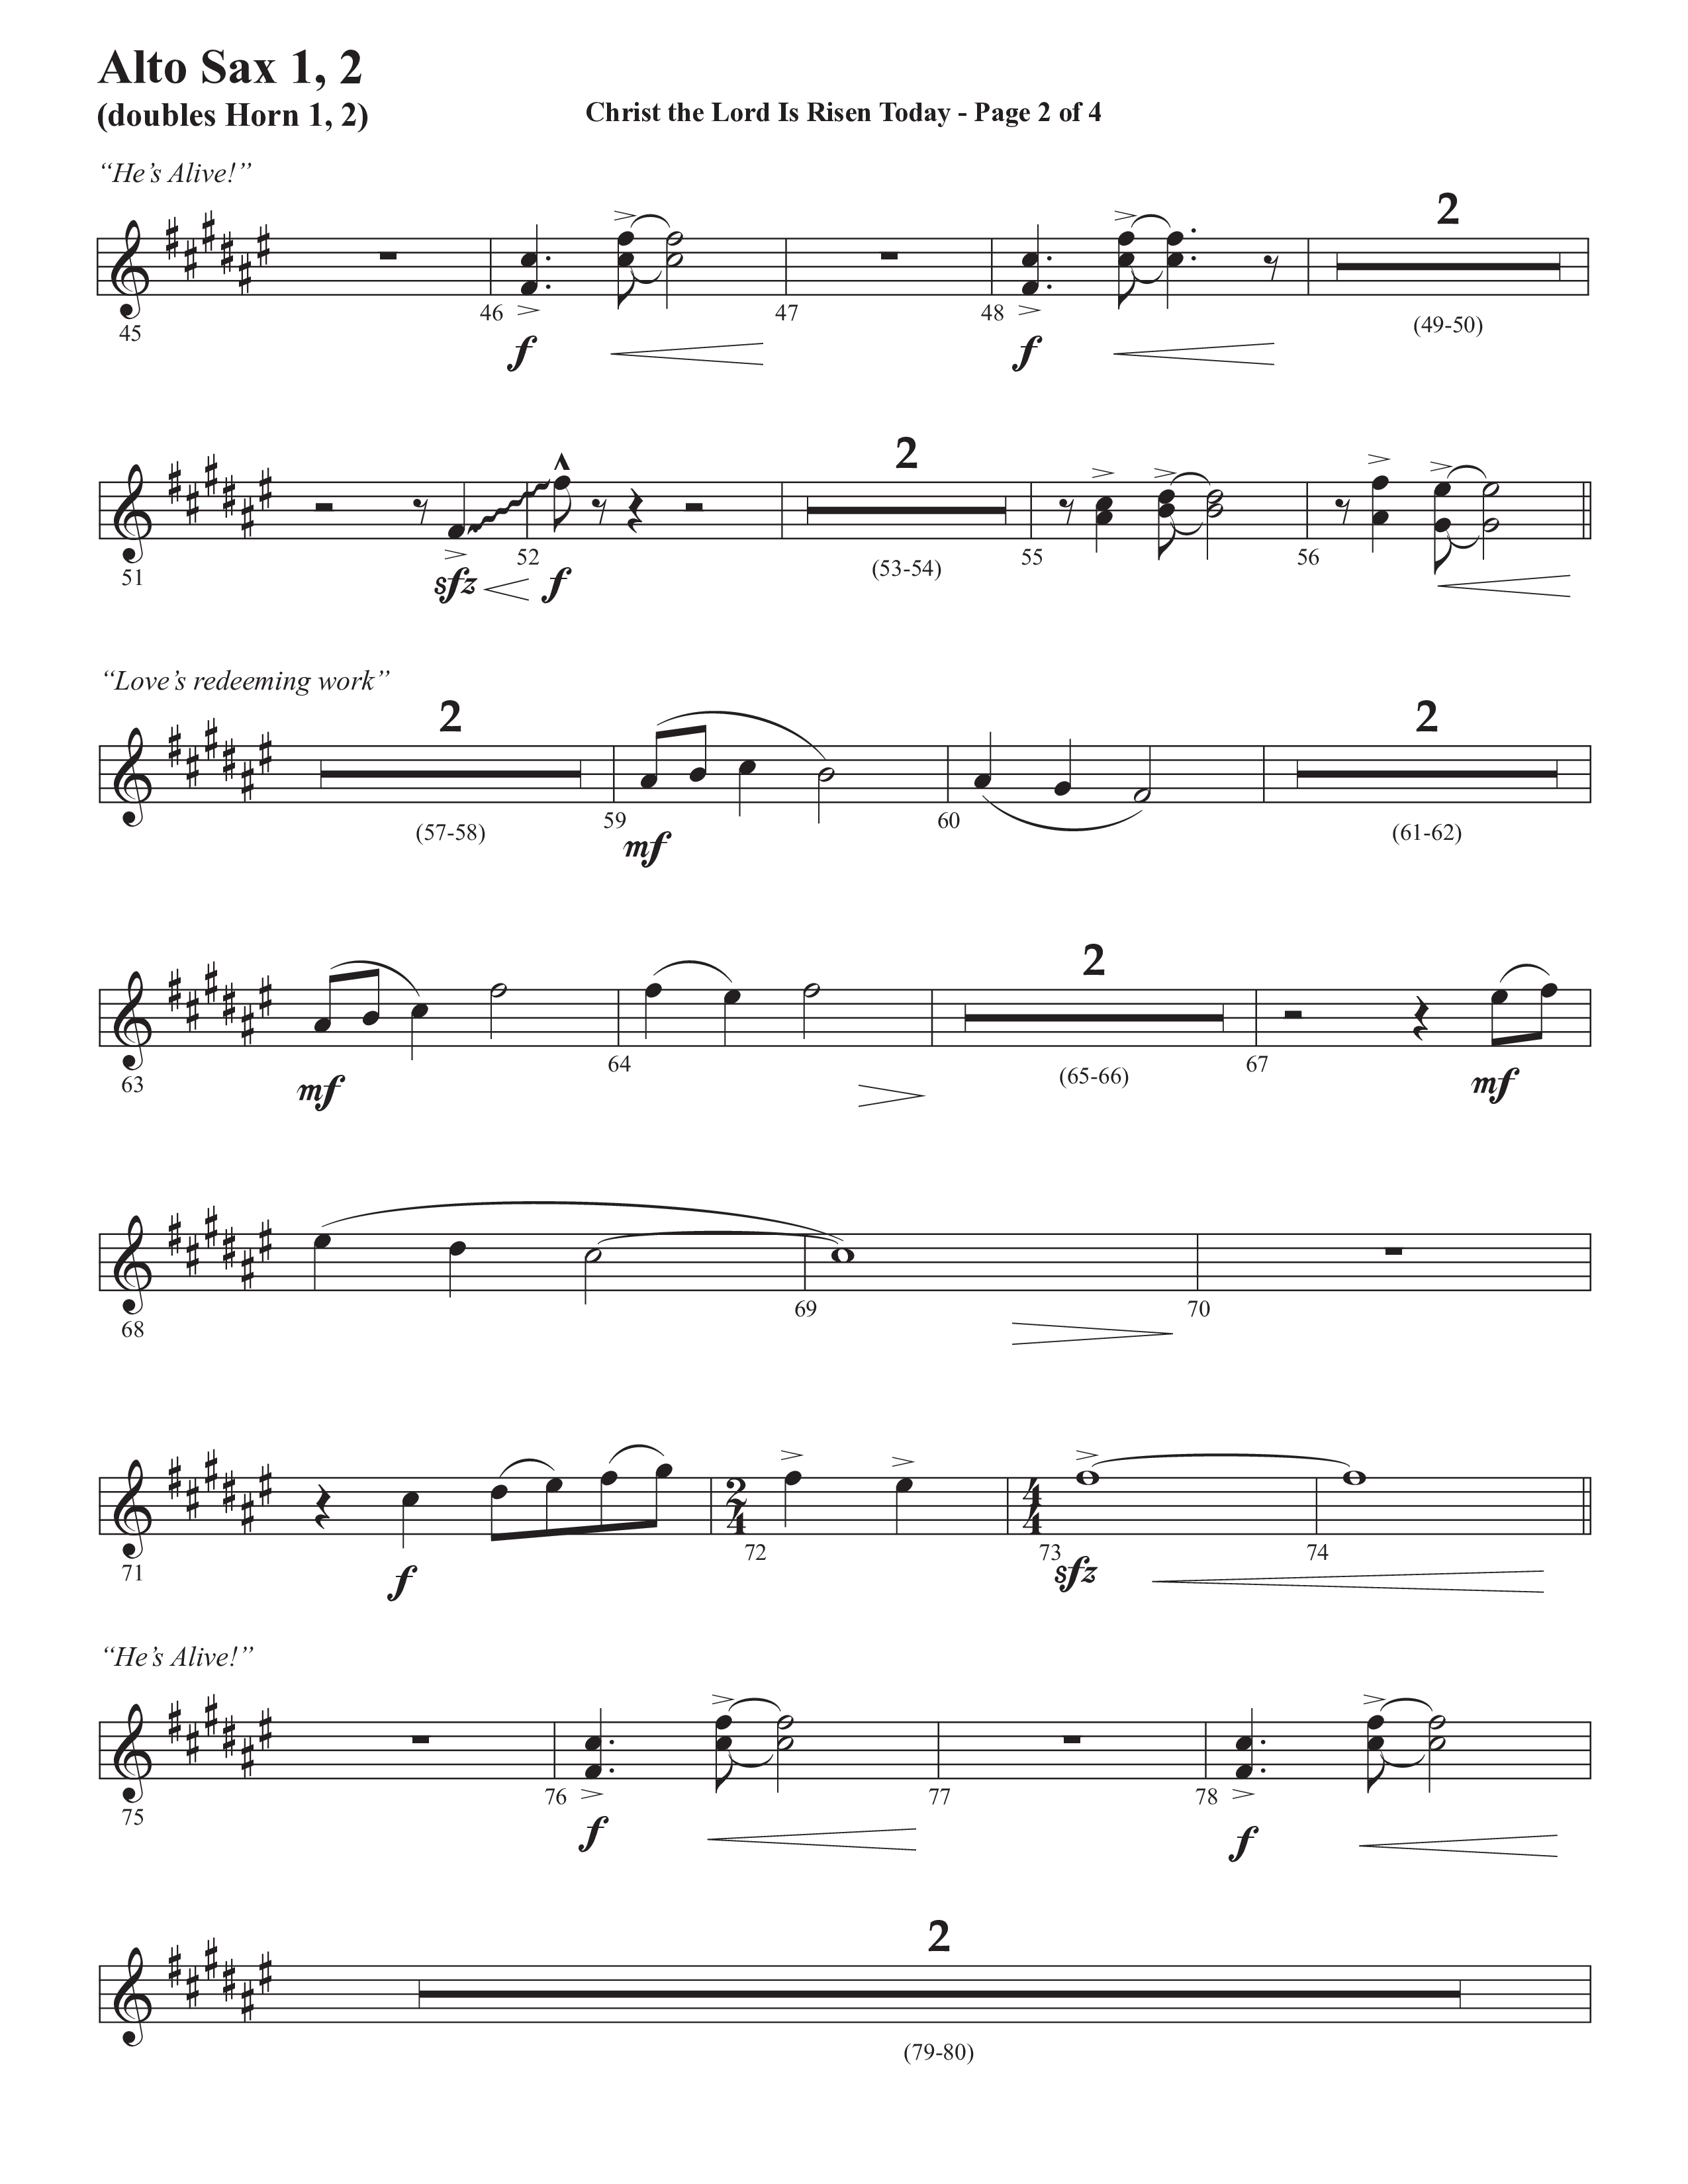 Christ The Lord Is Risen Today (He's Alive) (Choral Anthem SATB) Alto Sax 1/2 (Semsen Music / Arr. John Bolin / Orch. Cliff Duren)